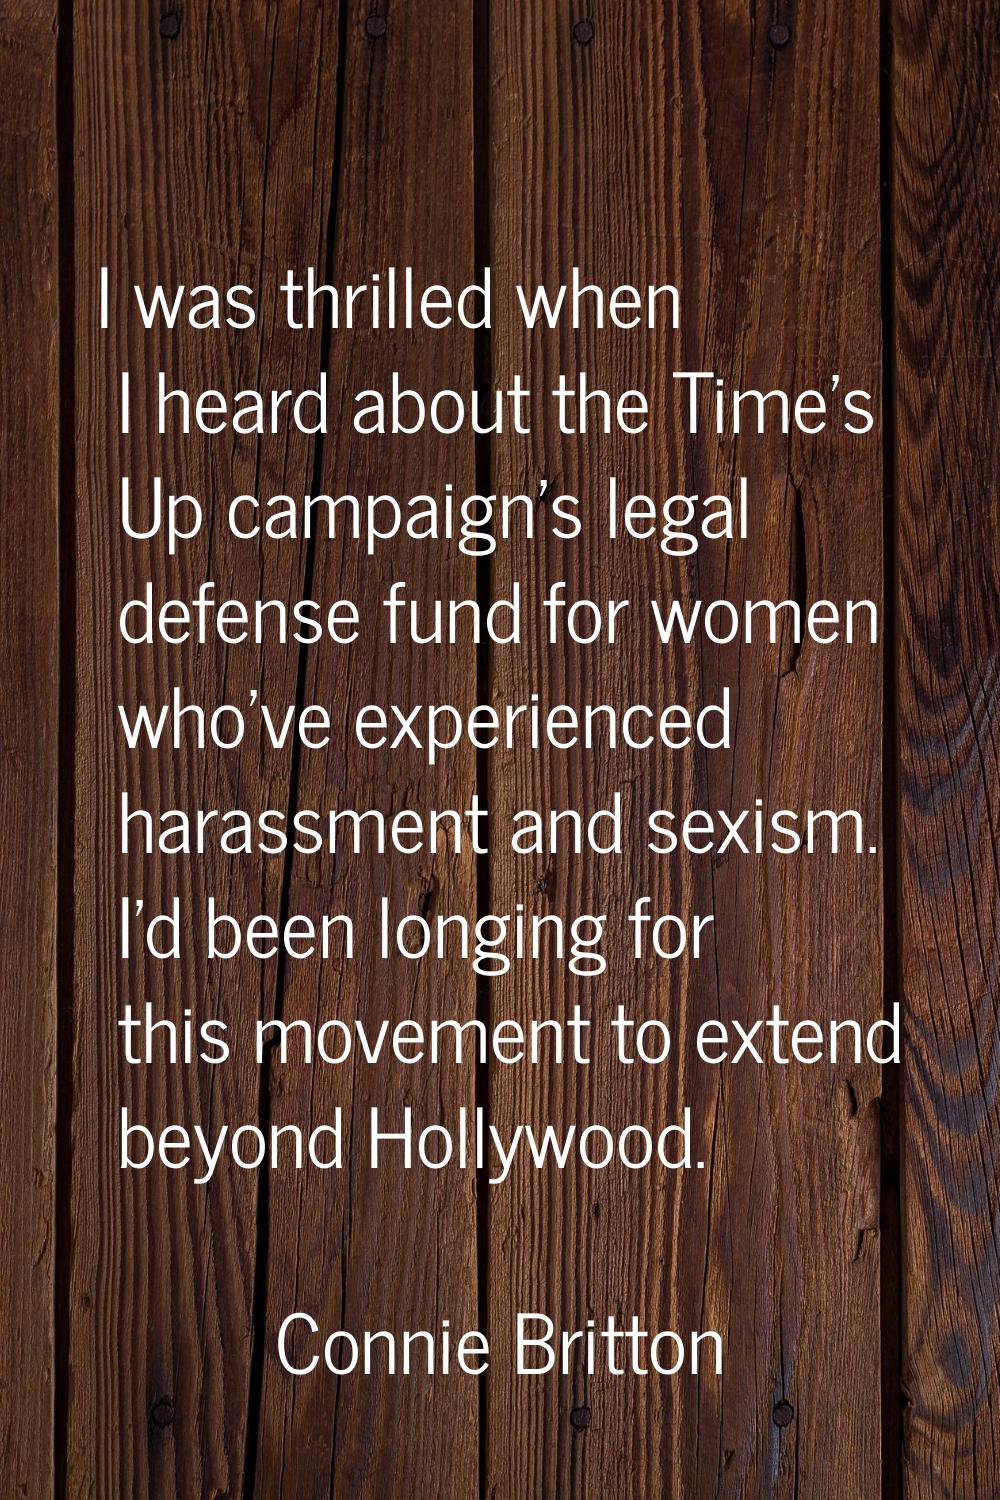 I was thrilled when I heard about the Time's Up campaign's legal defense fund for women who've expe